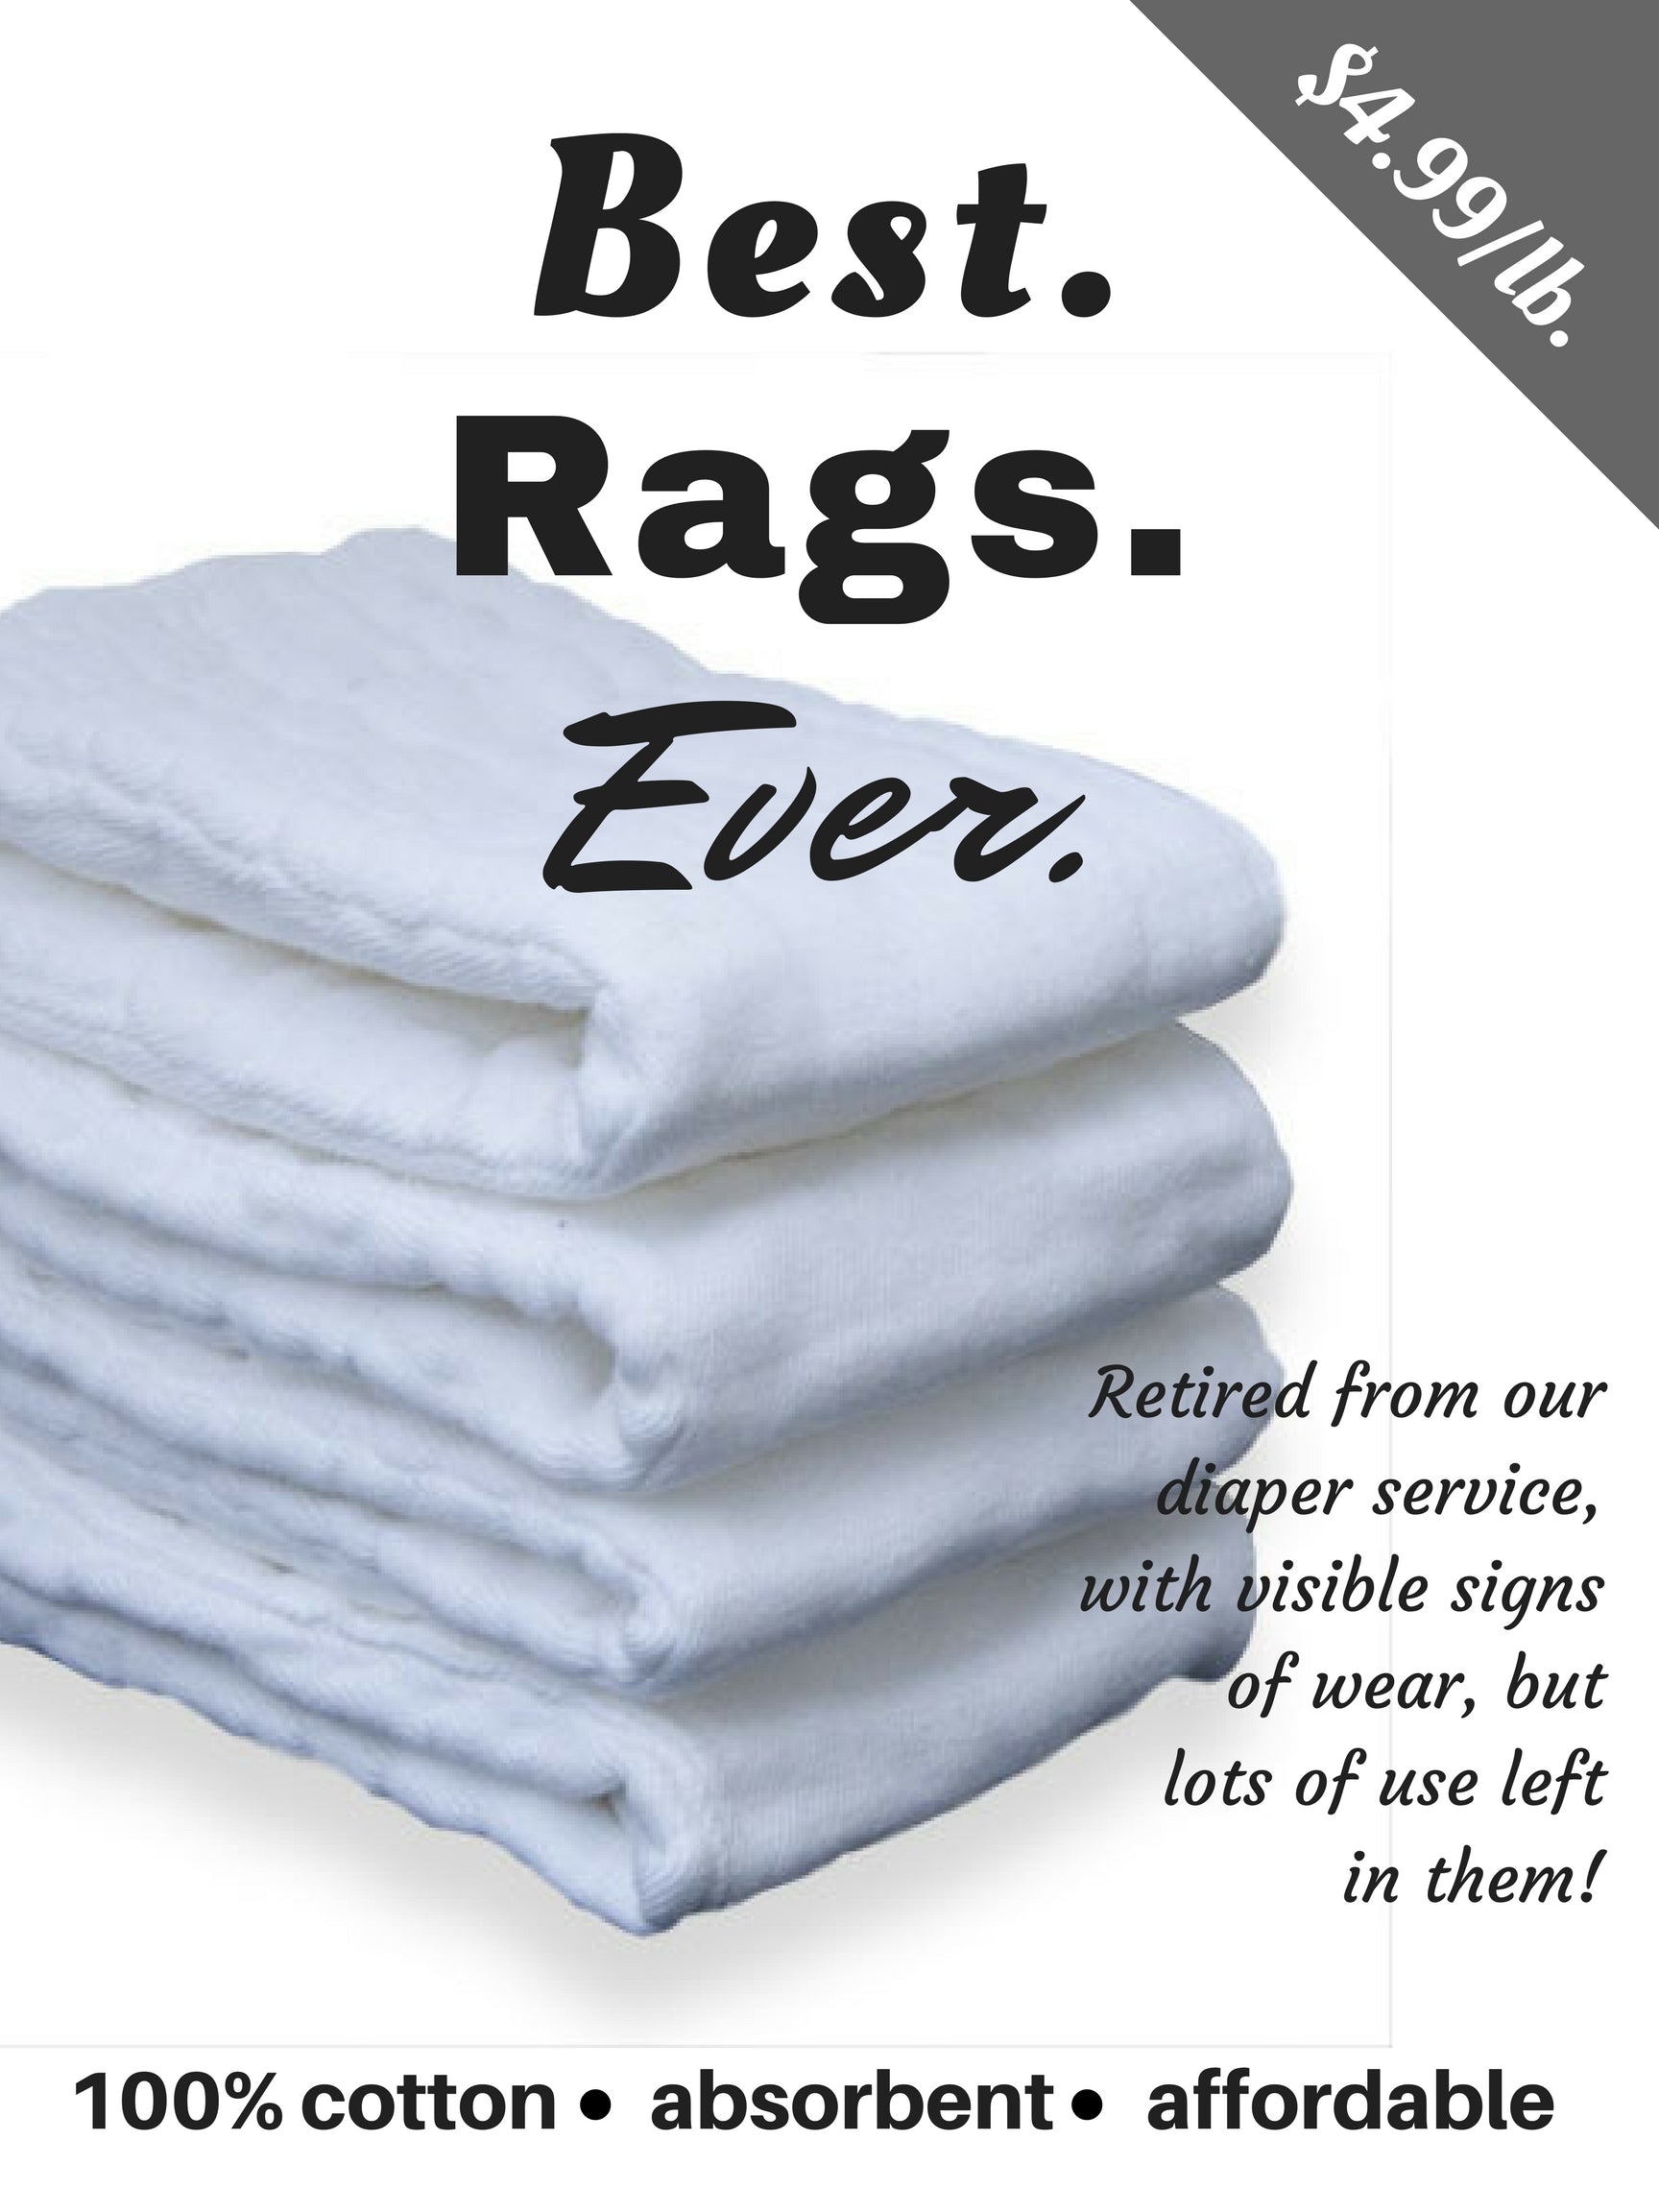 Cloth Diaper Rags - GREAT FOR CLEANING, MECHANICS, ARTISTS